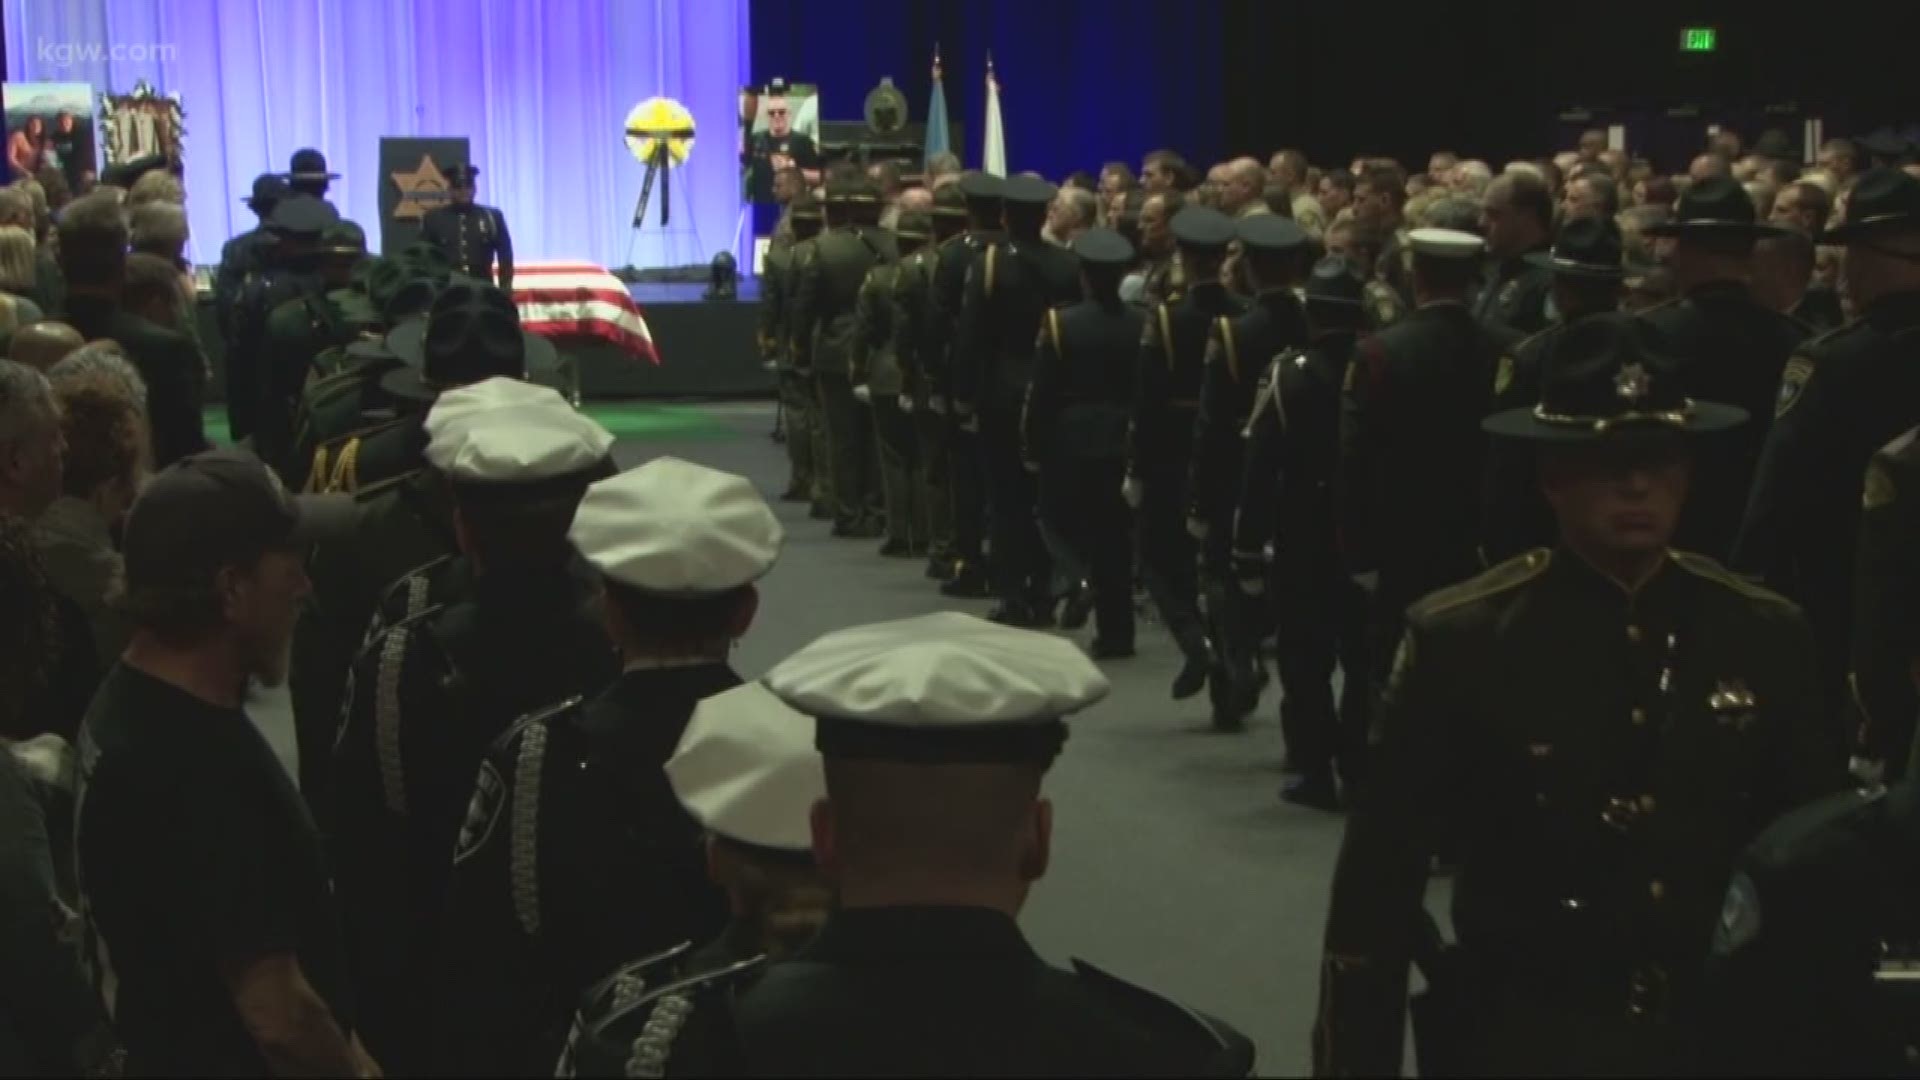 A memorial for fallen Cowlitz County sheriff’s deputy Justin DeRosier was held at the Chiles Center in Portland.